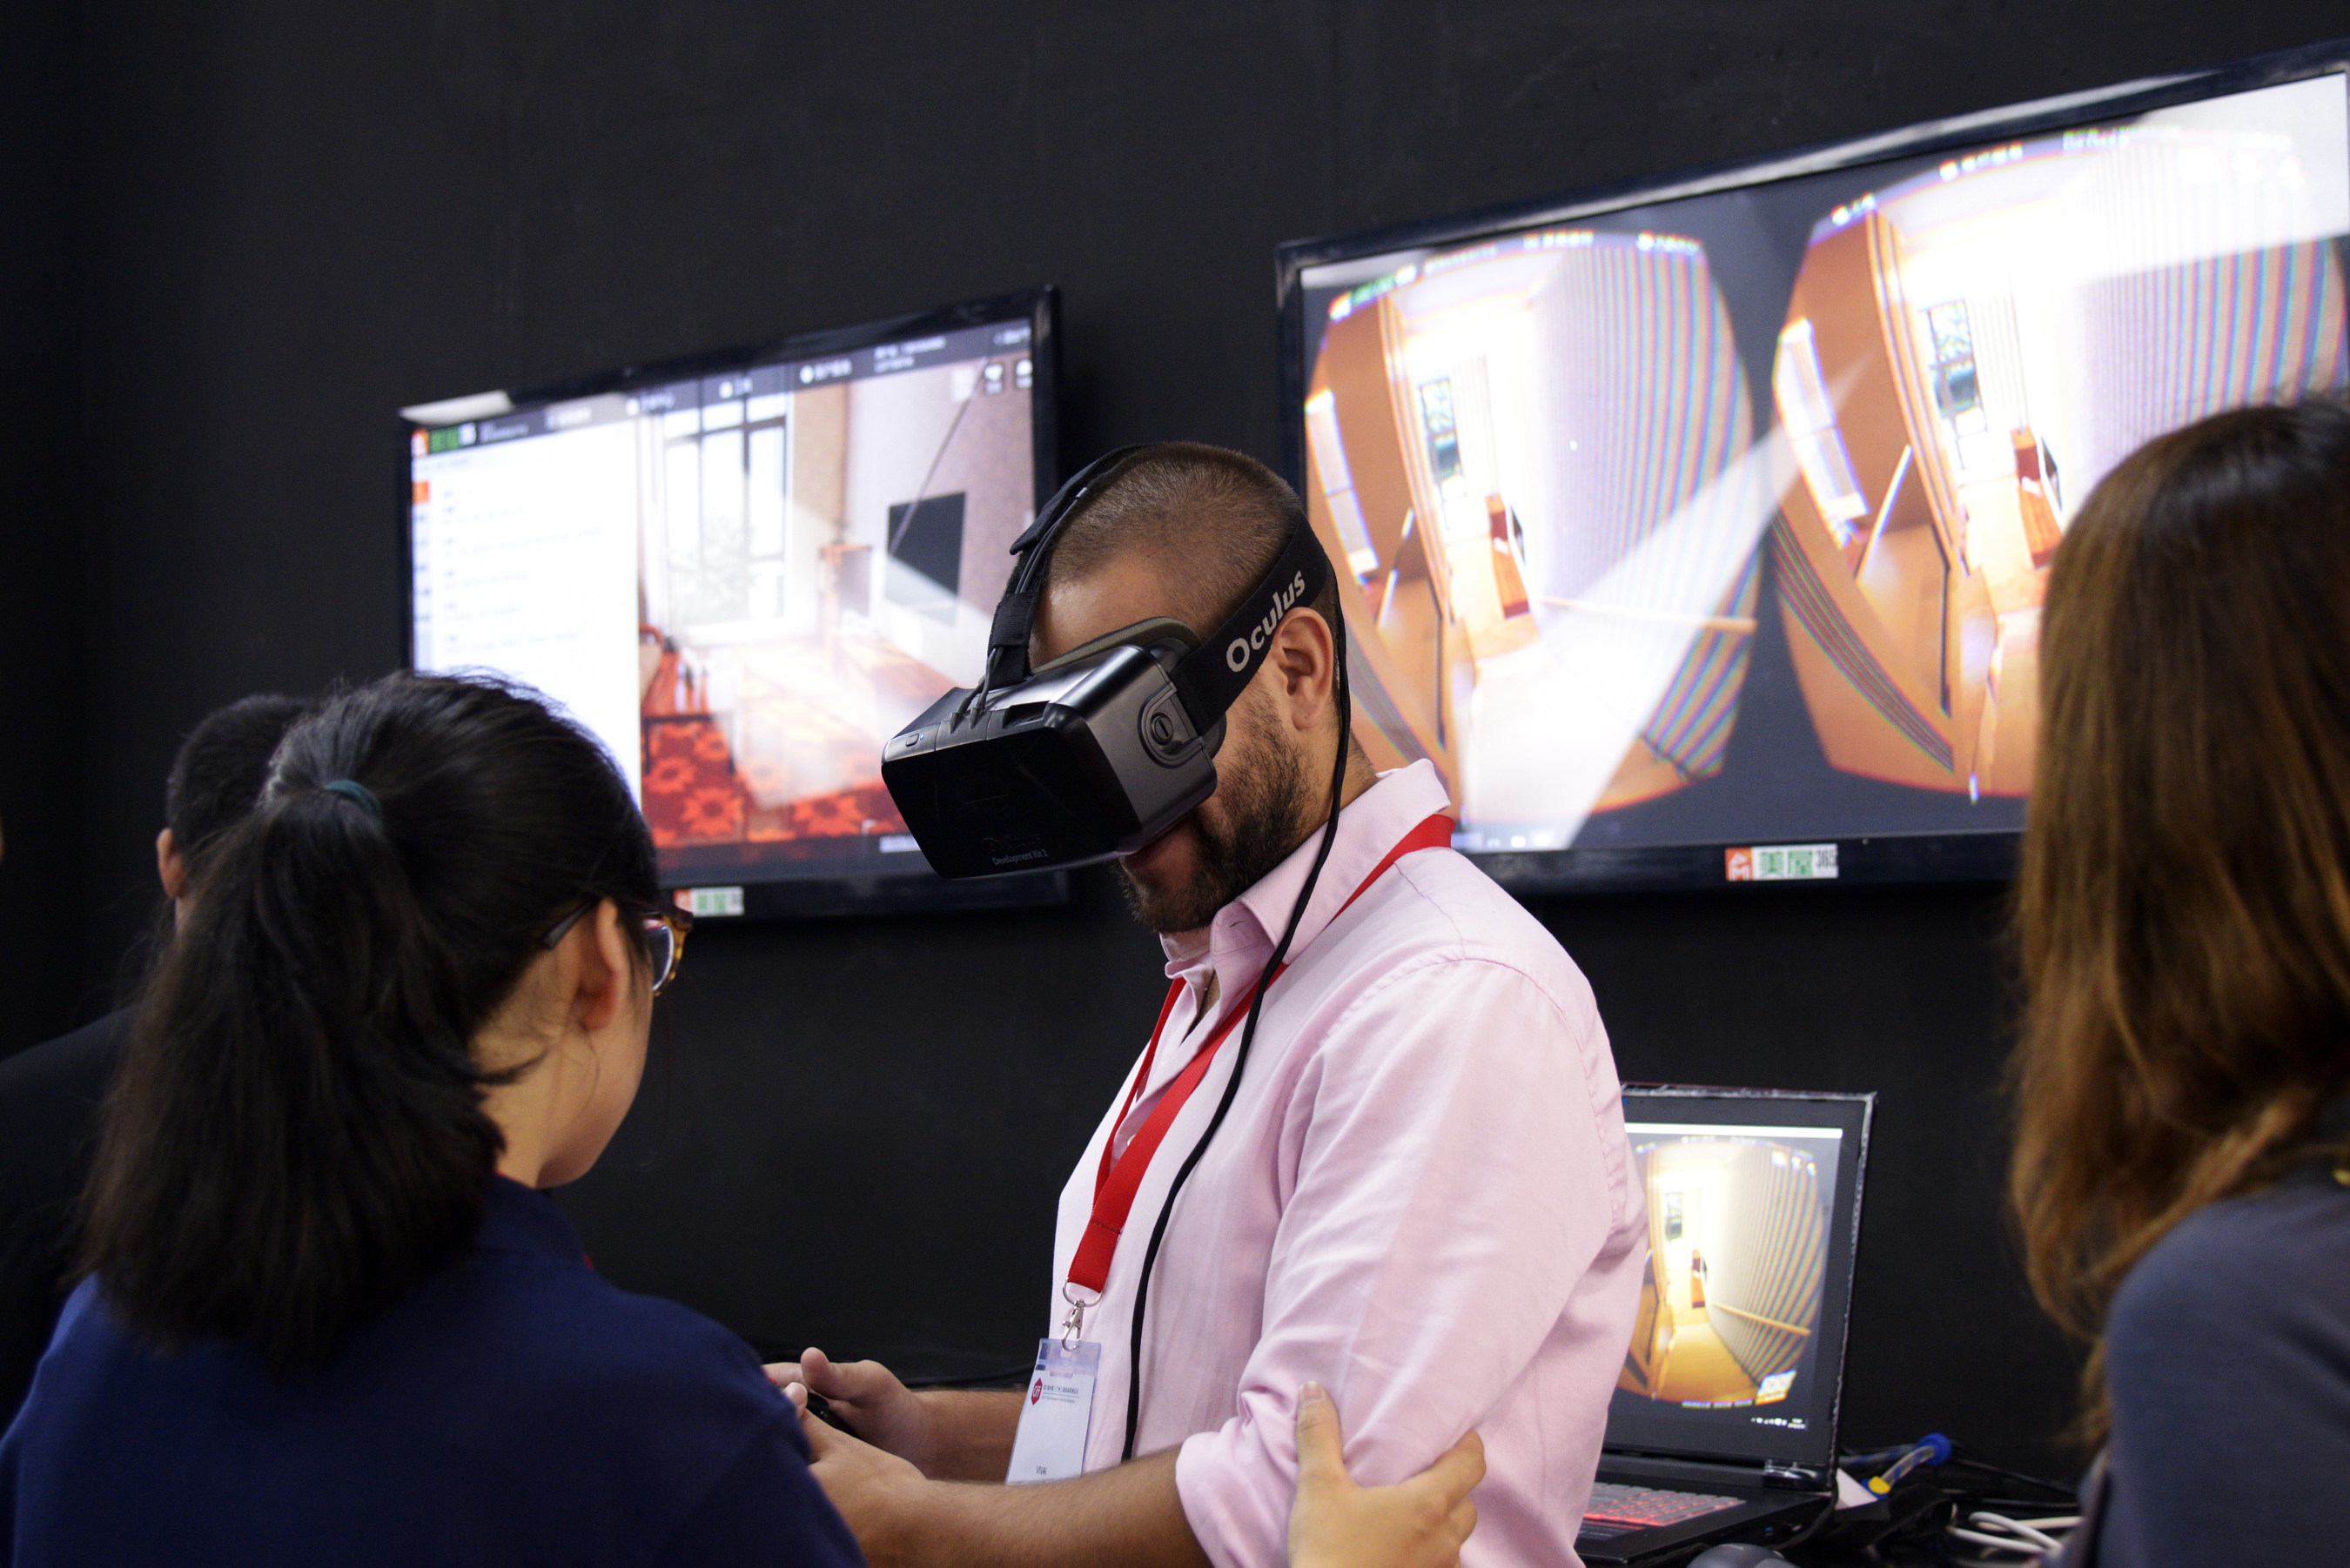 At CIFF (Guangzhou) 2016, Landbond released its “fitting room” for furniture which allows customers to “try on” the furniture in their own home using the VR headset.